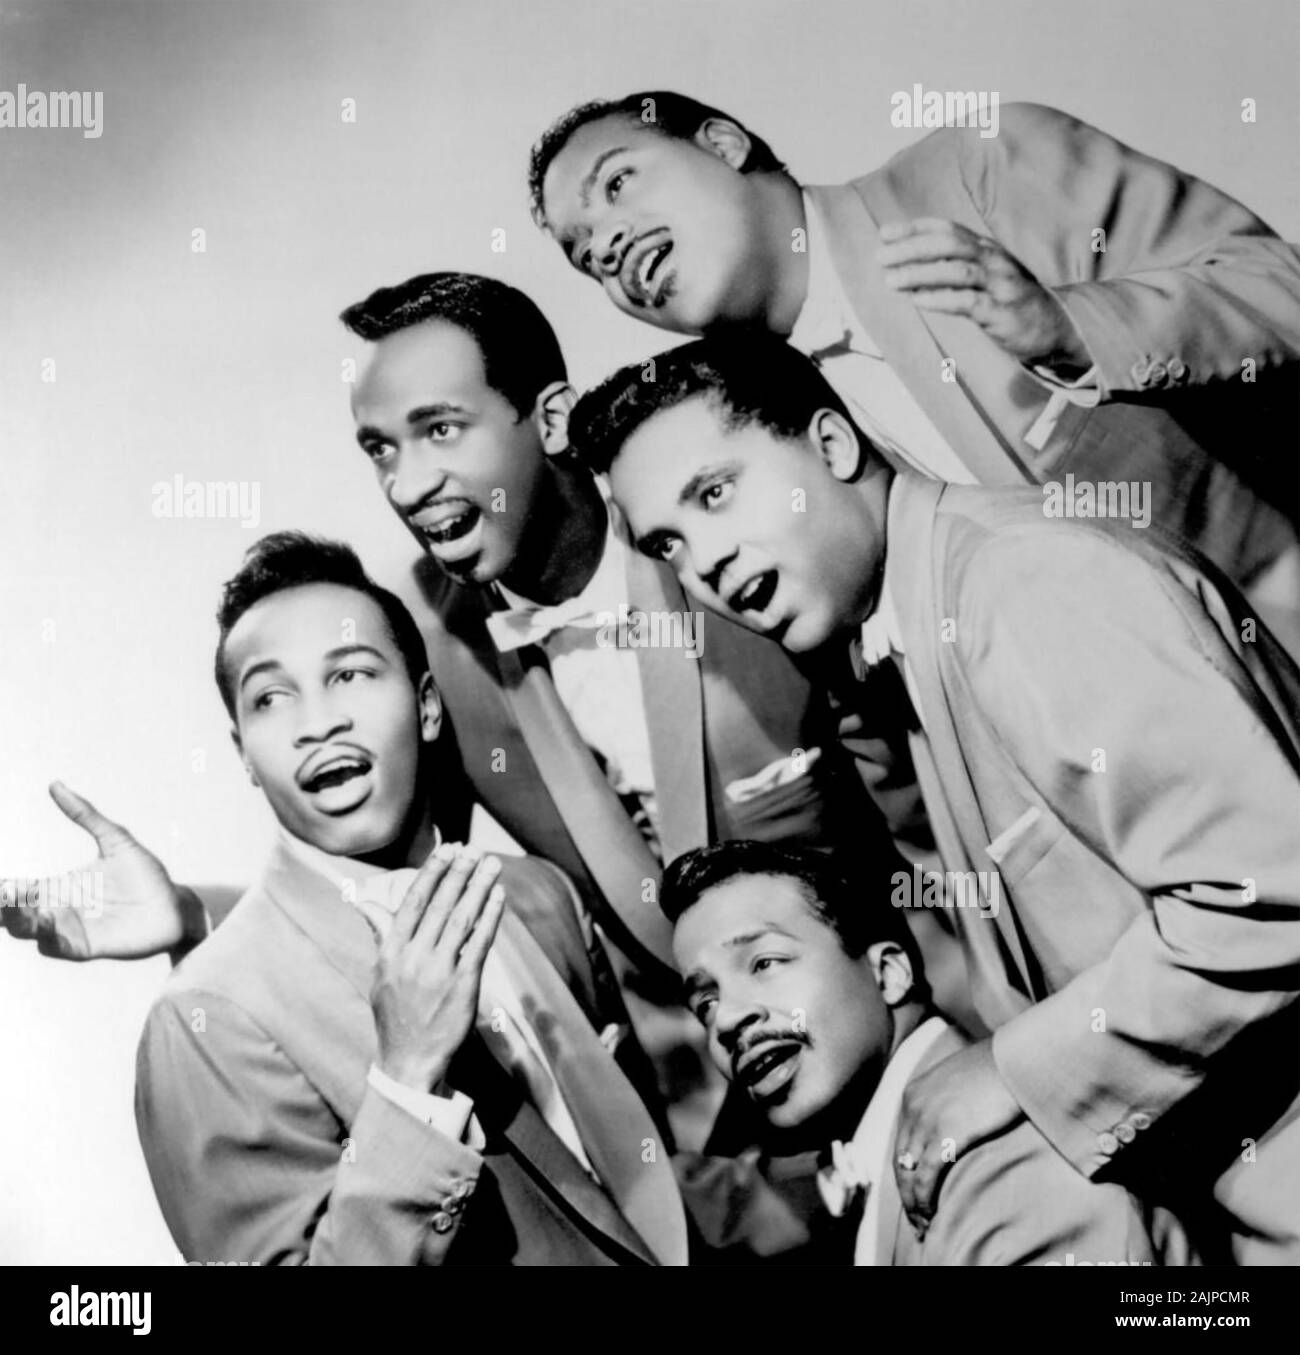 THE DRIFTERS Promotional photo of American vocal group about 1970 Stock Photo